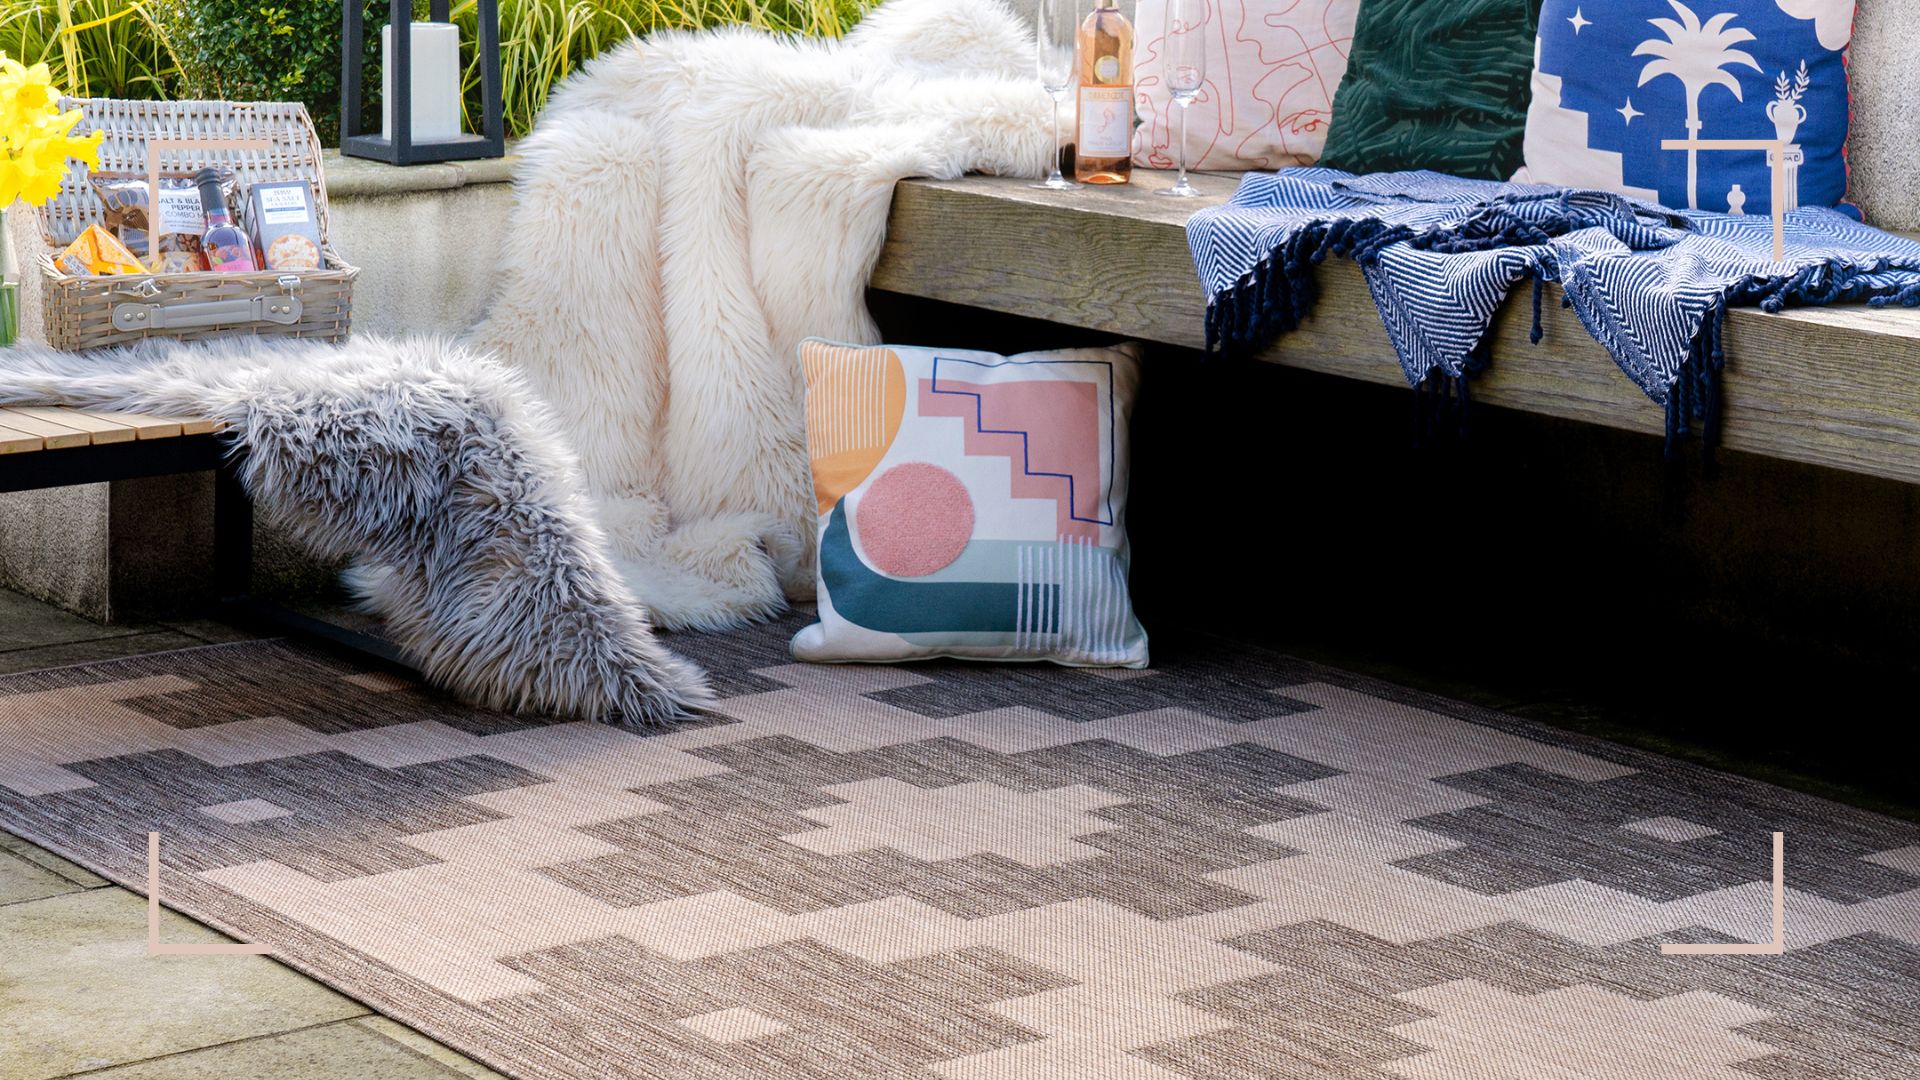 Will Outdoor Rugs Ruin Your Deck?